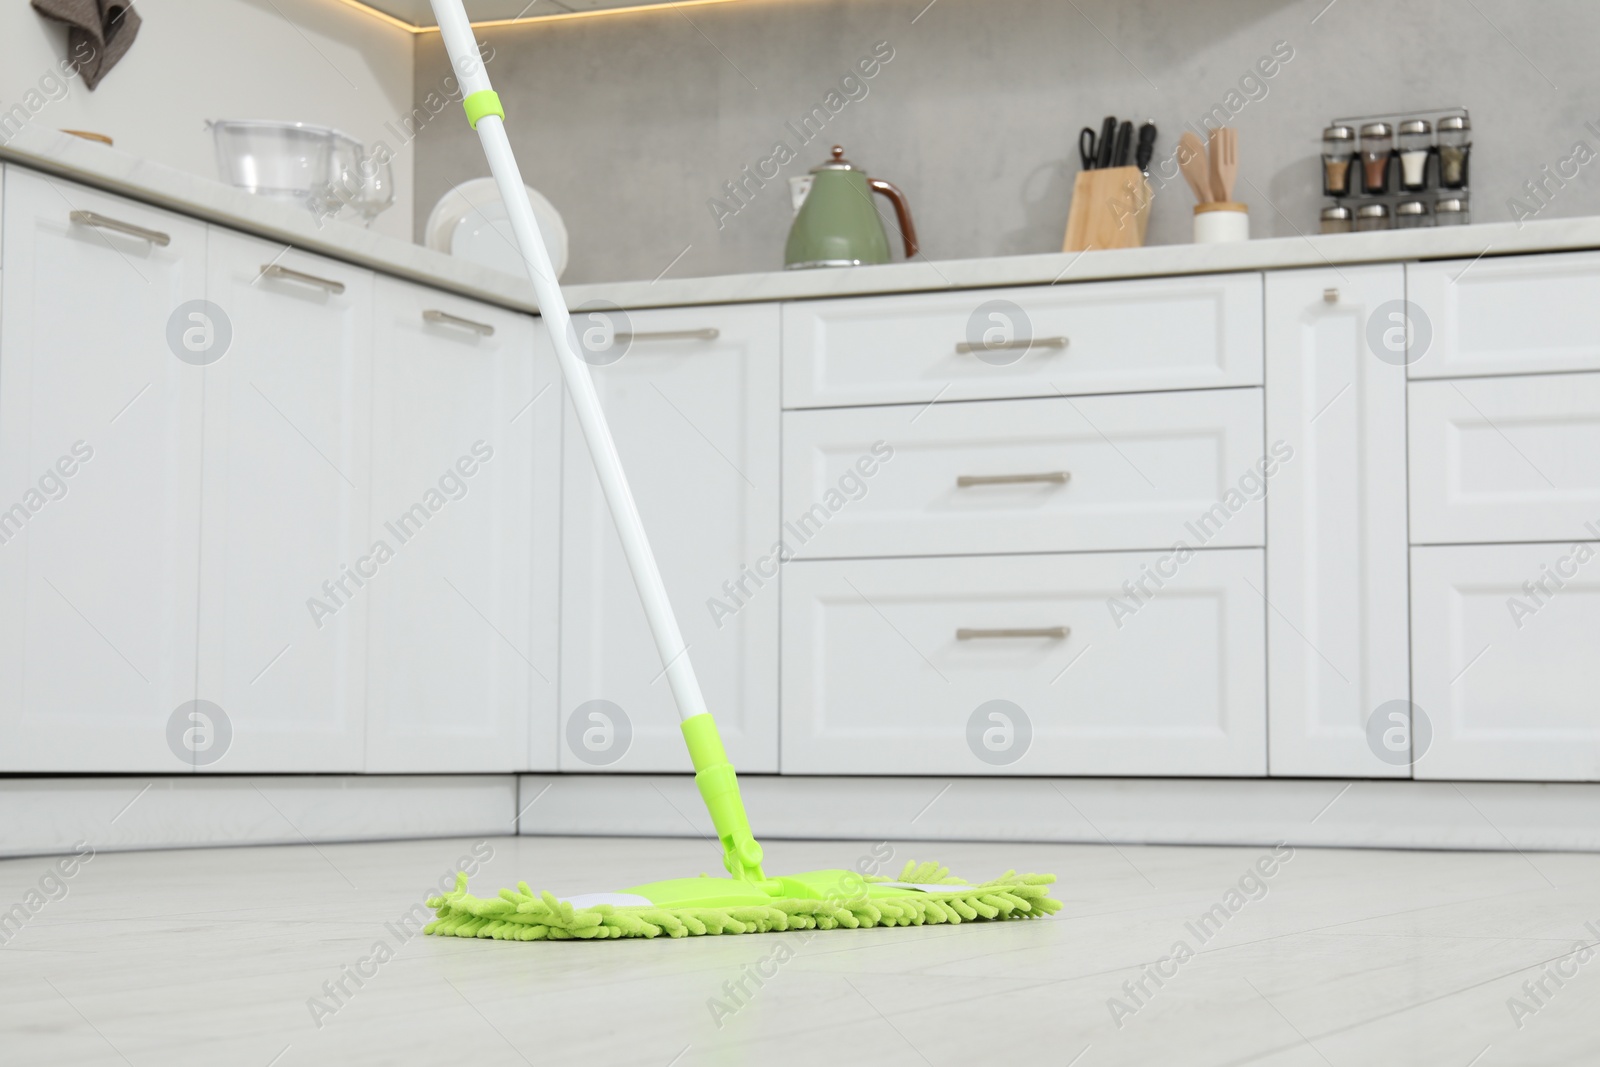 Photo of Cleaning of parquet floor with mop in kitchen, low angle view